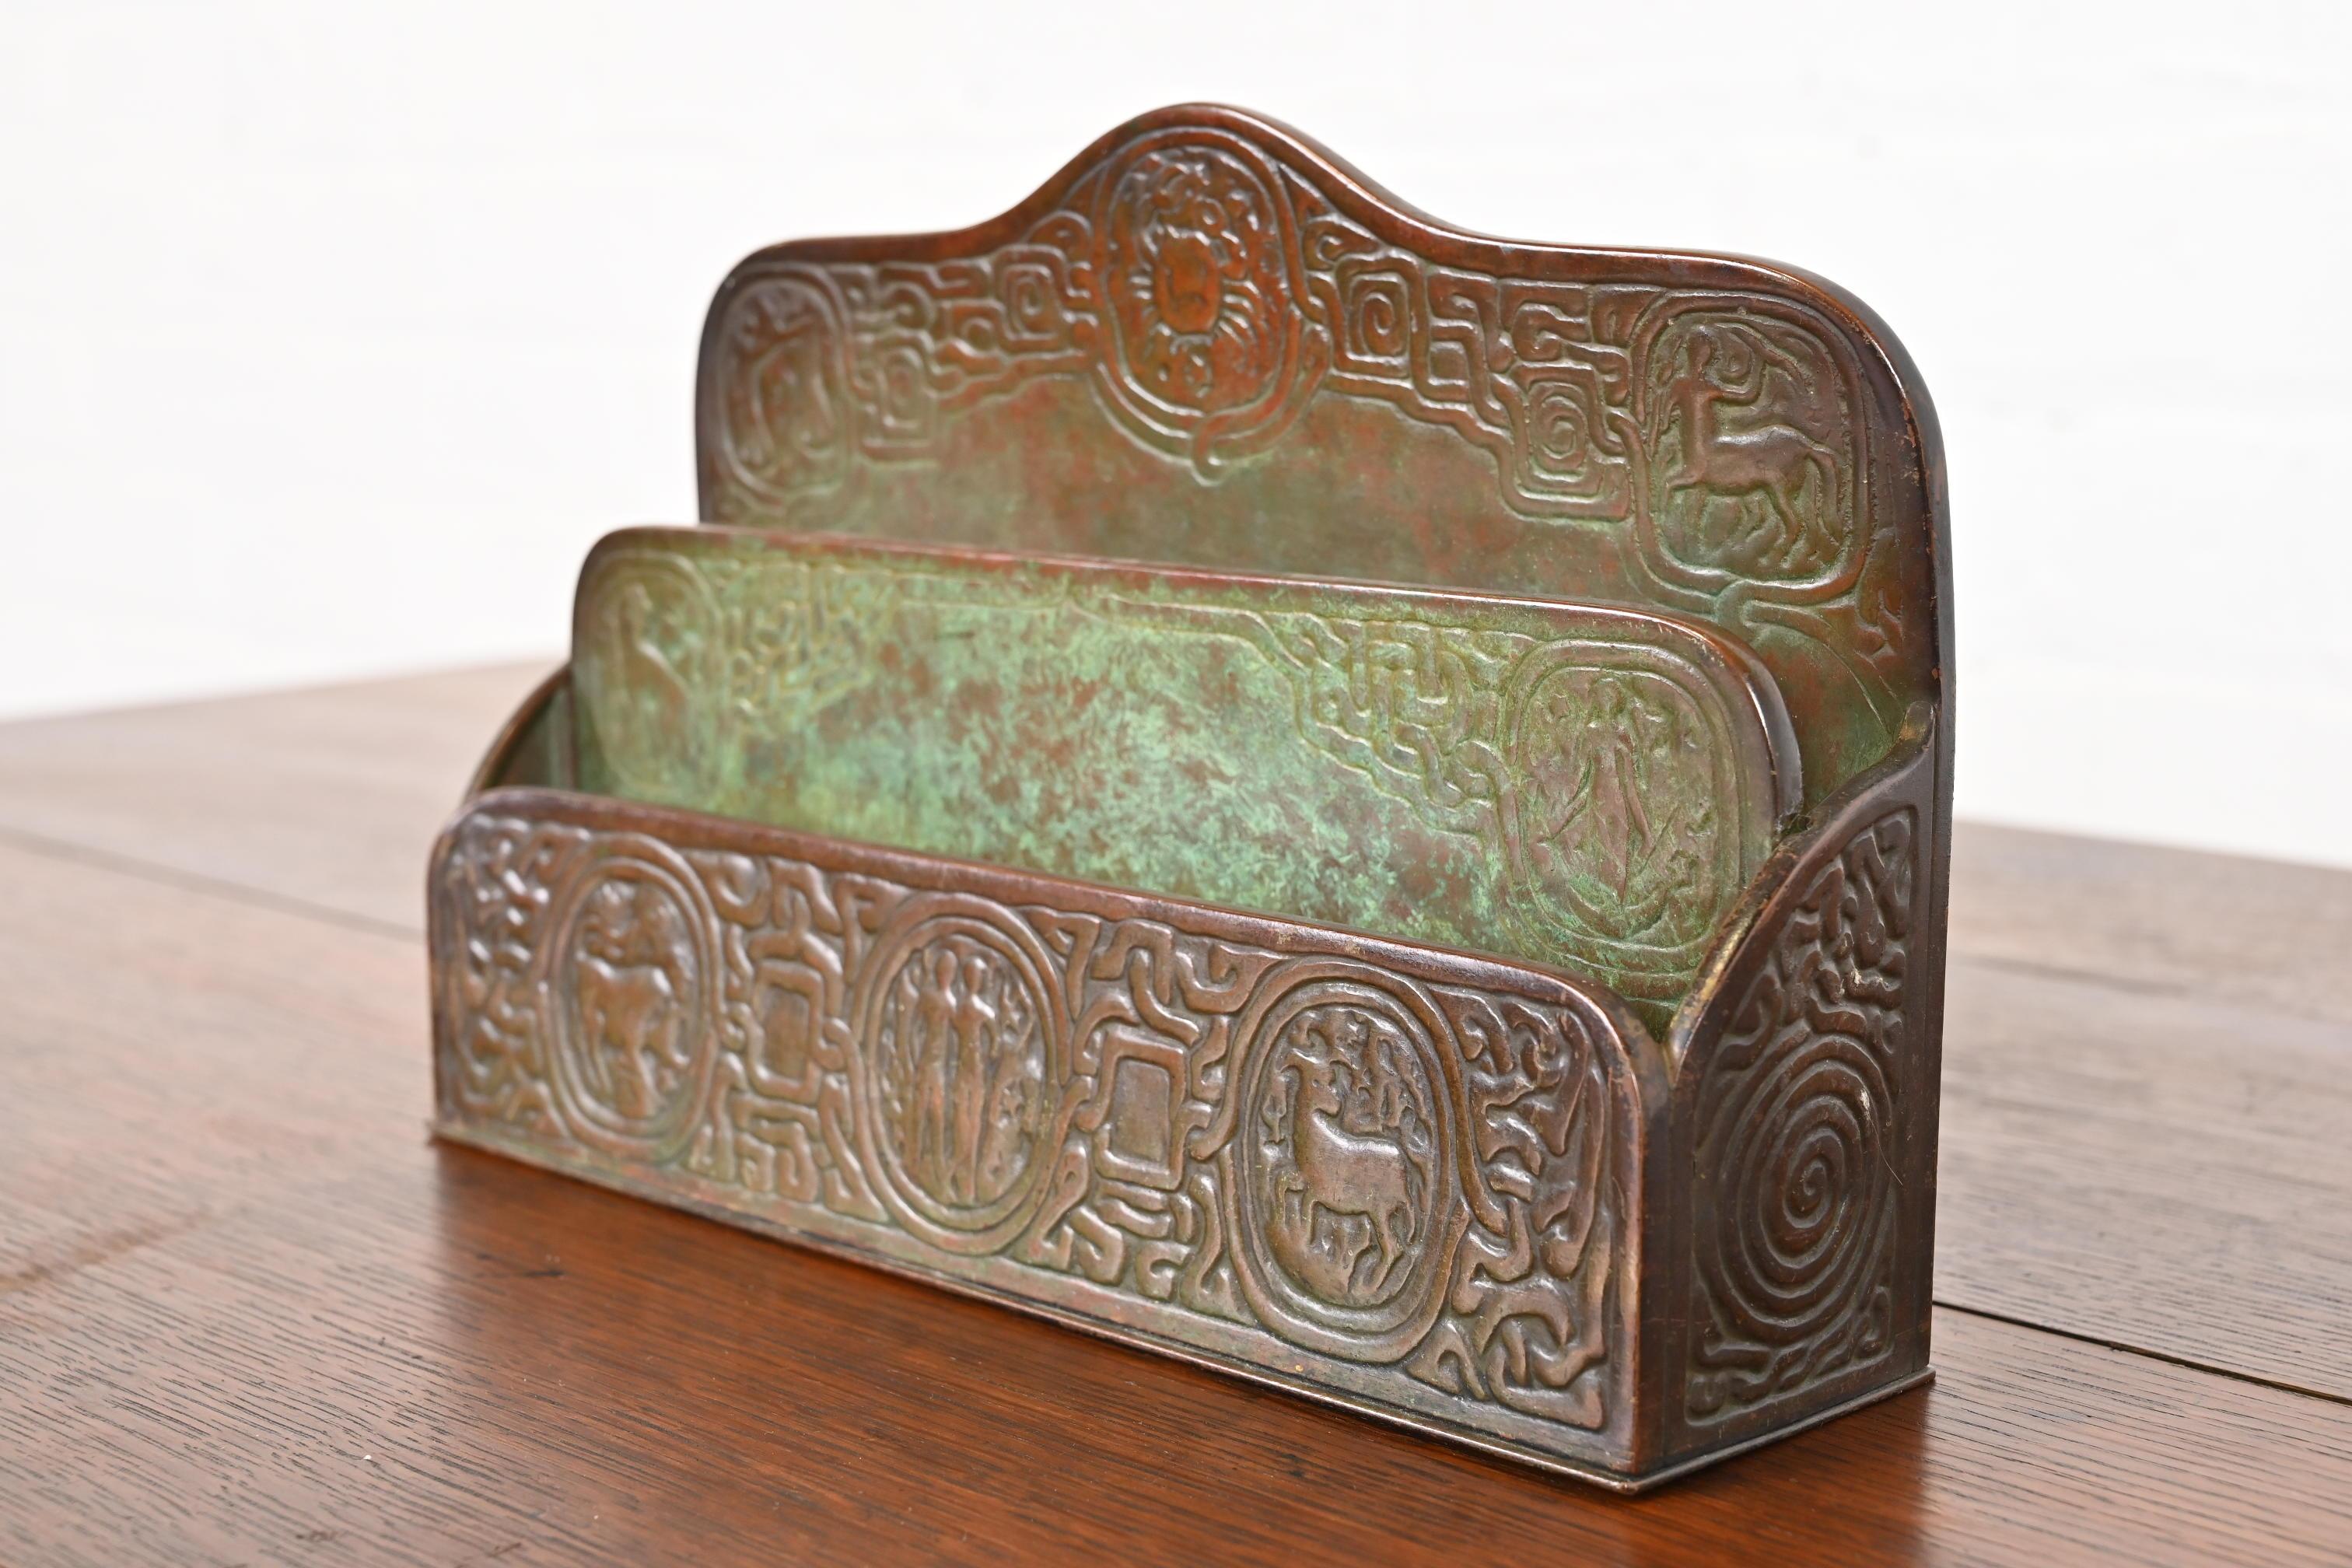 Tiffany Studios New York Zodiac Bronze Letter Rack In Good Condition For Sale In South Bend, IN